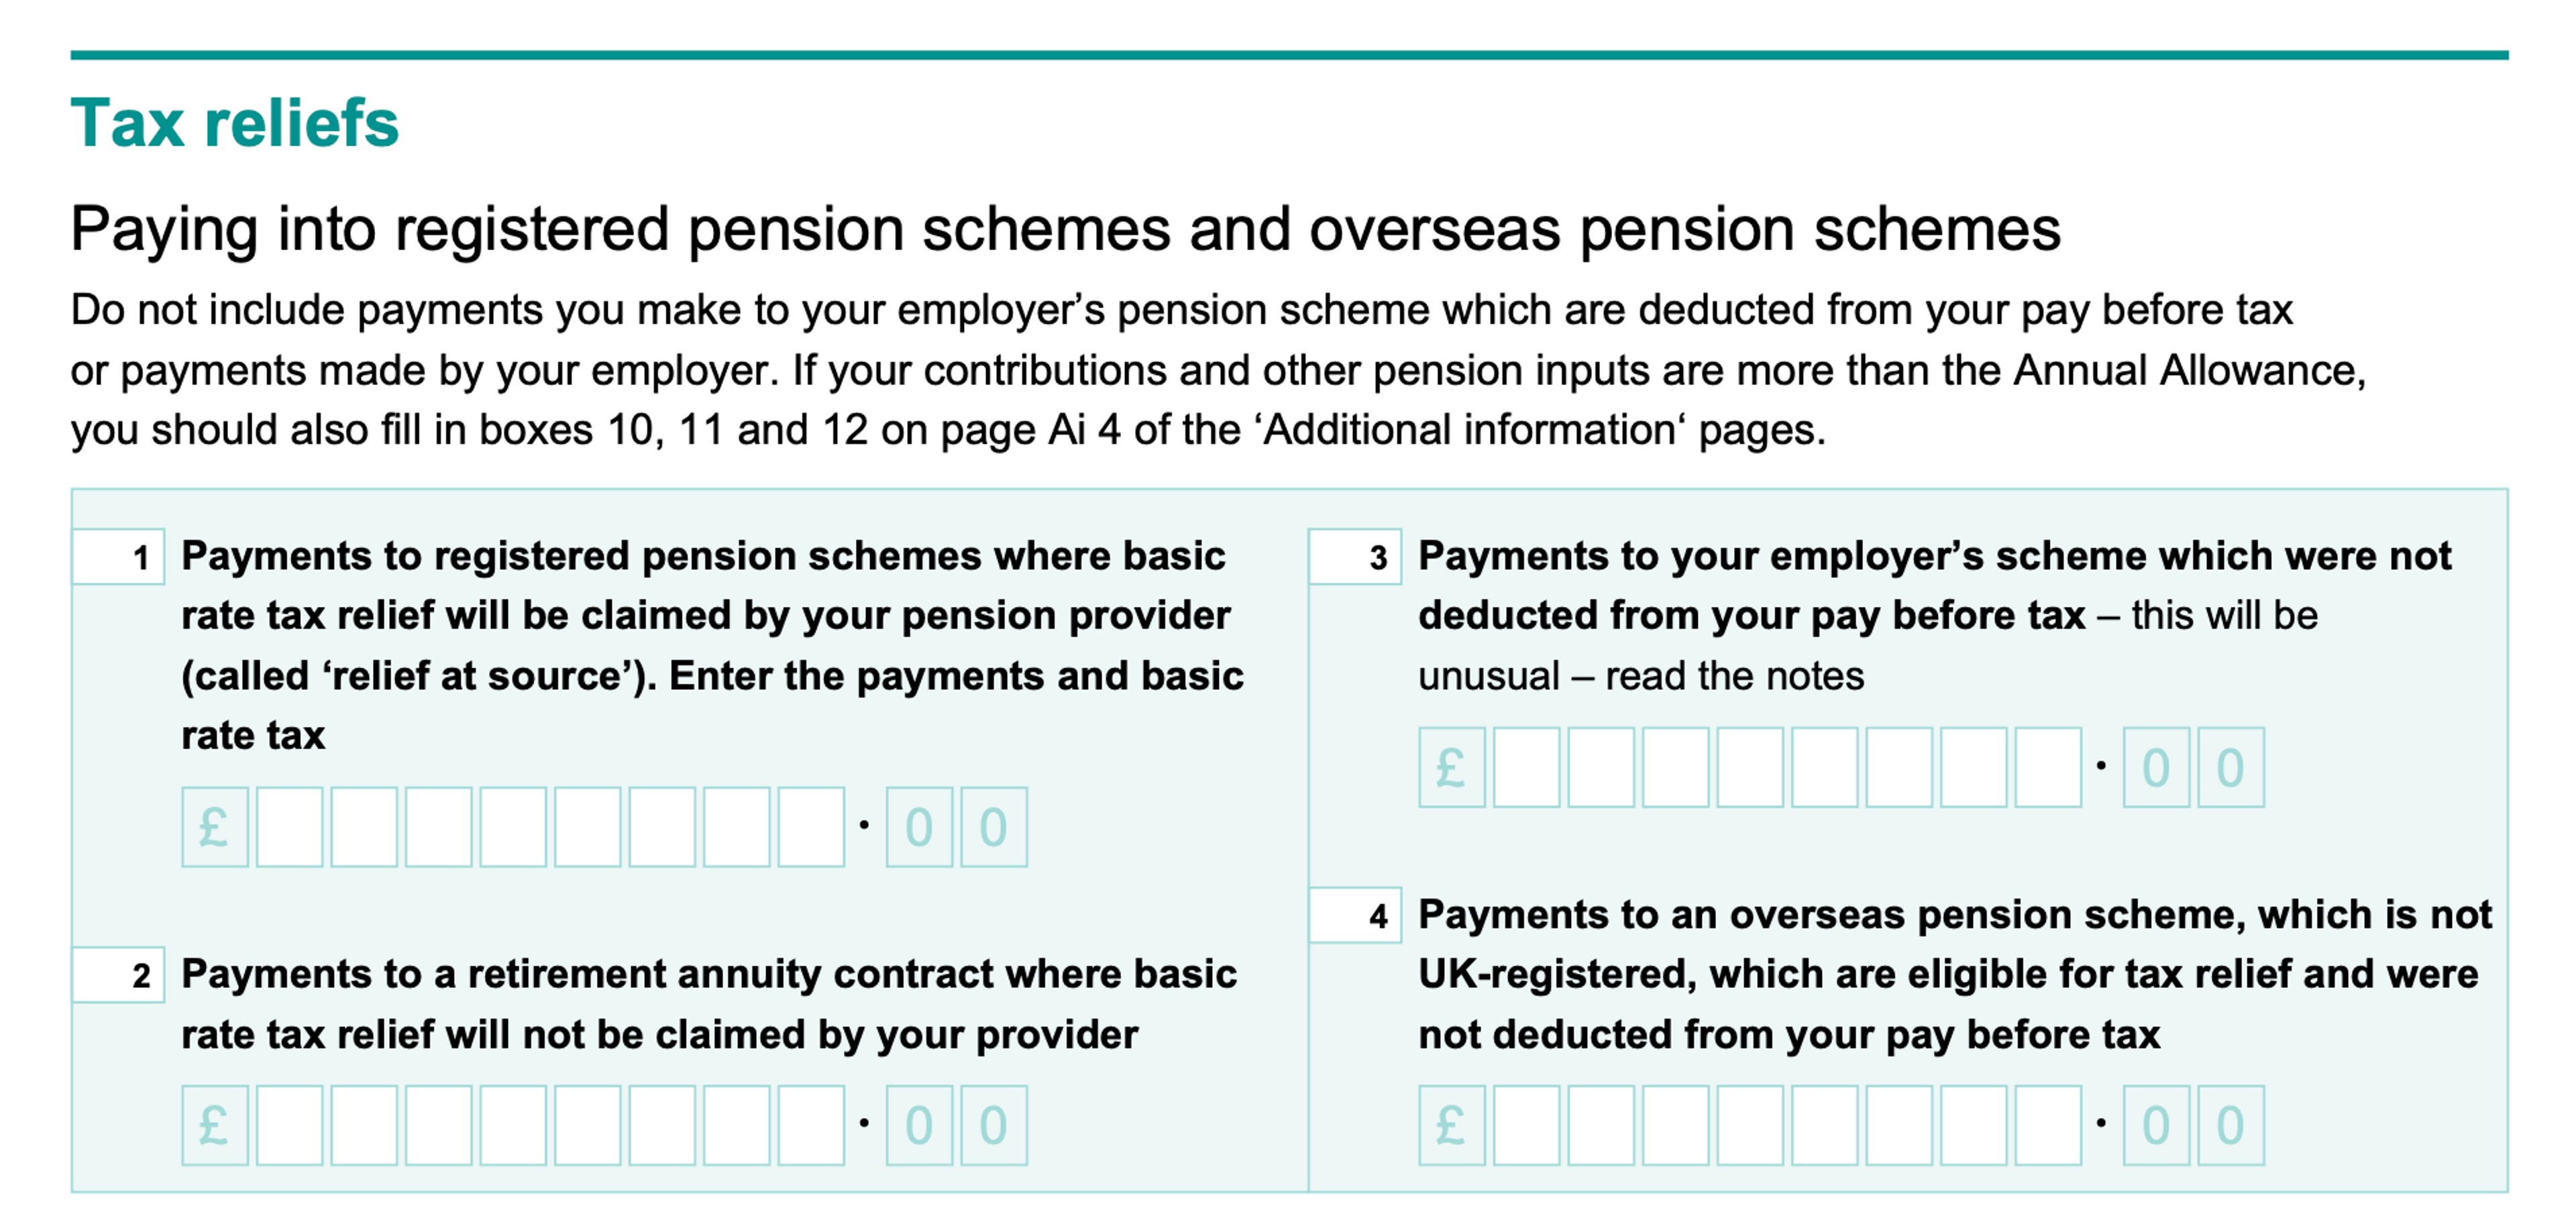 tax reliefs section on self assessment tax return